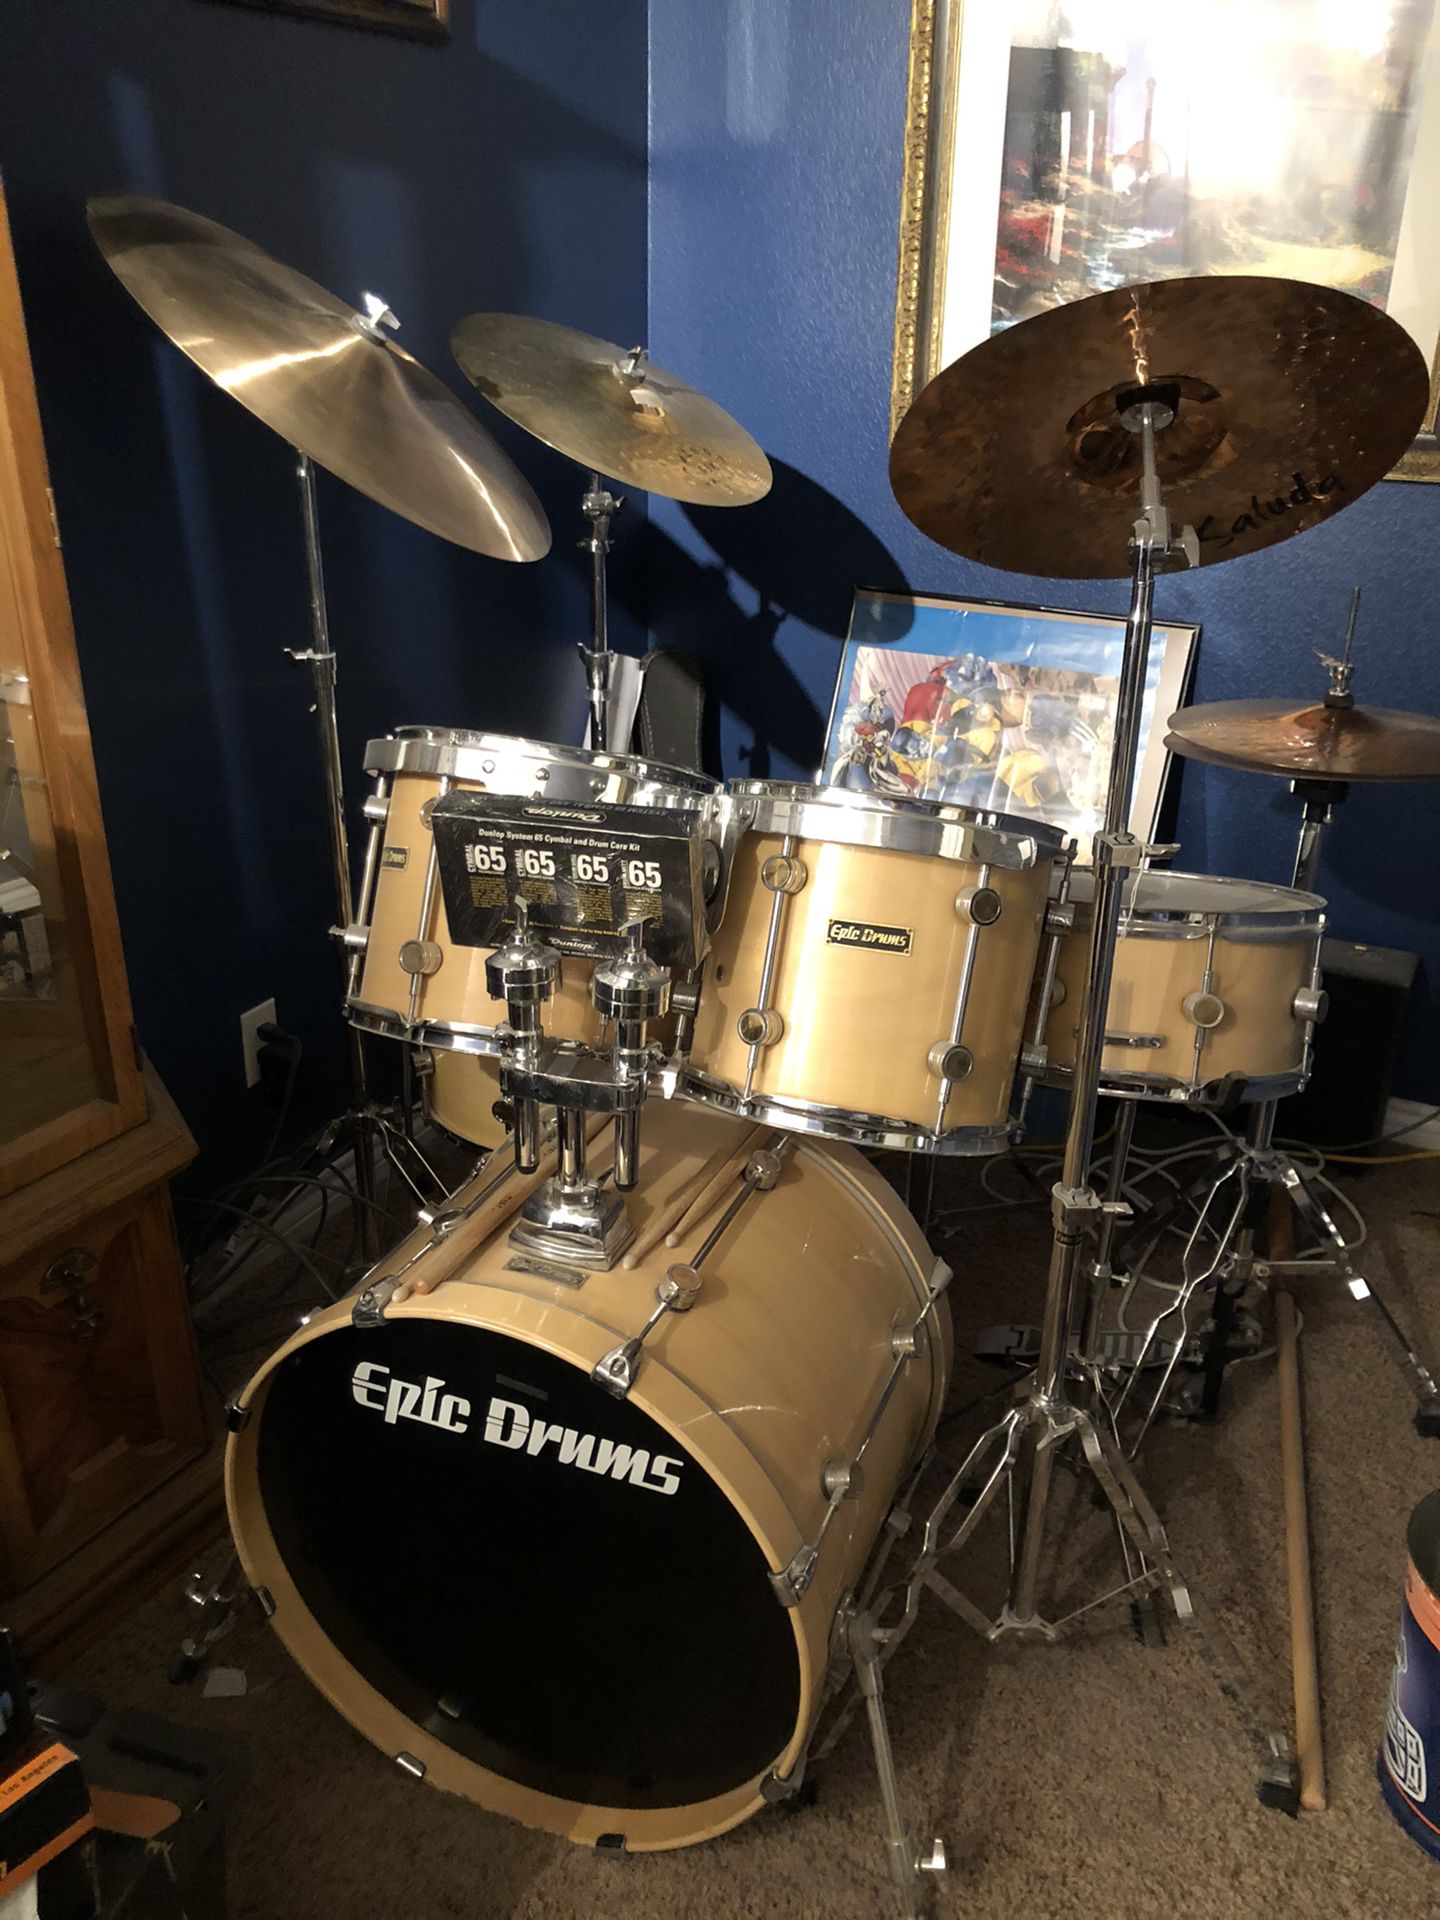 Epic drum set with stands, cymbals, hardware and drum throne